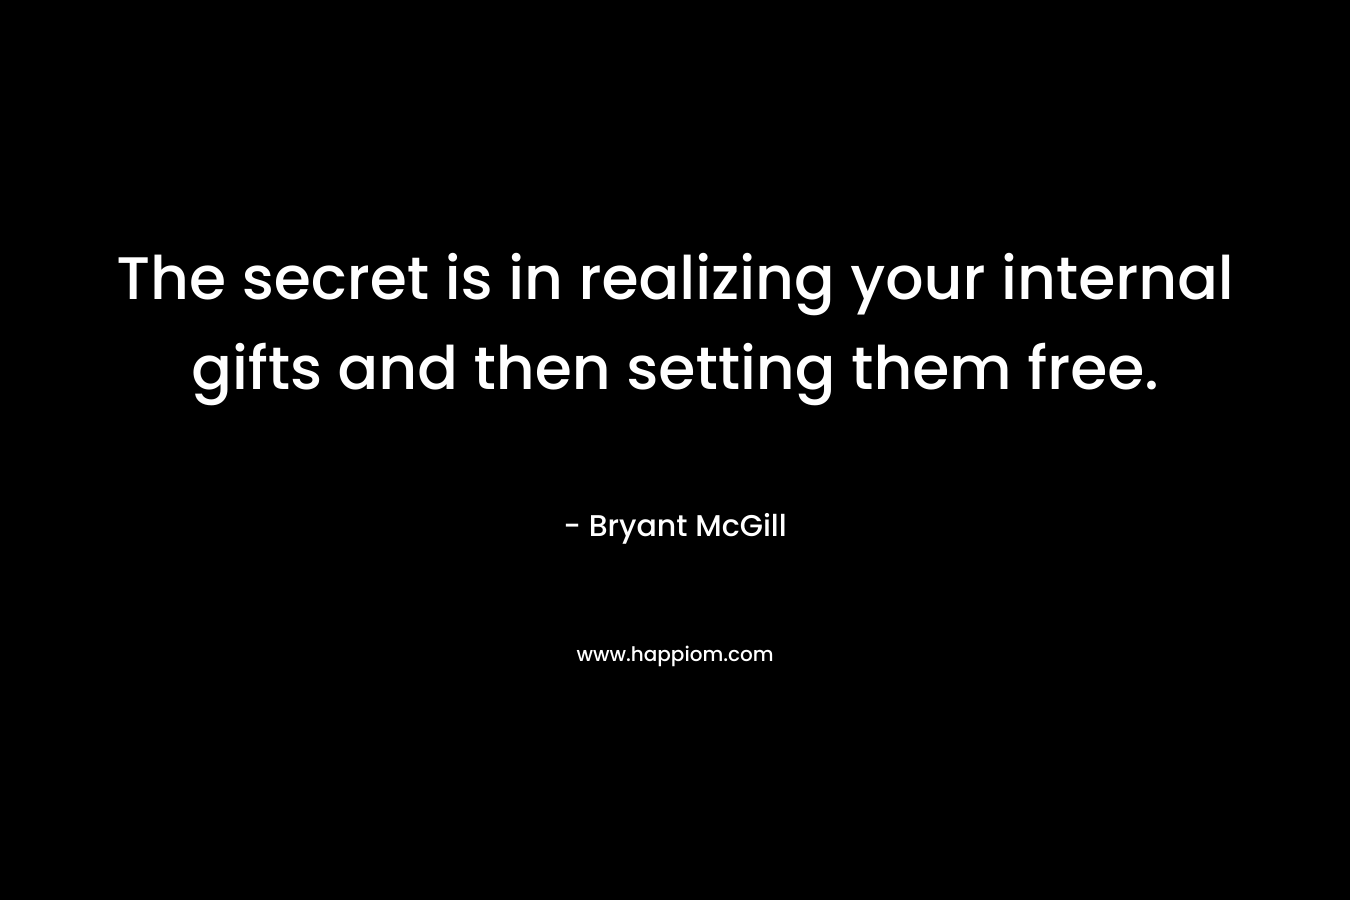 The secret is in realizing your internal gifts and then setting them free. – Bryant McGill